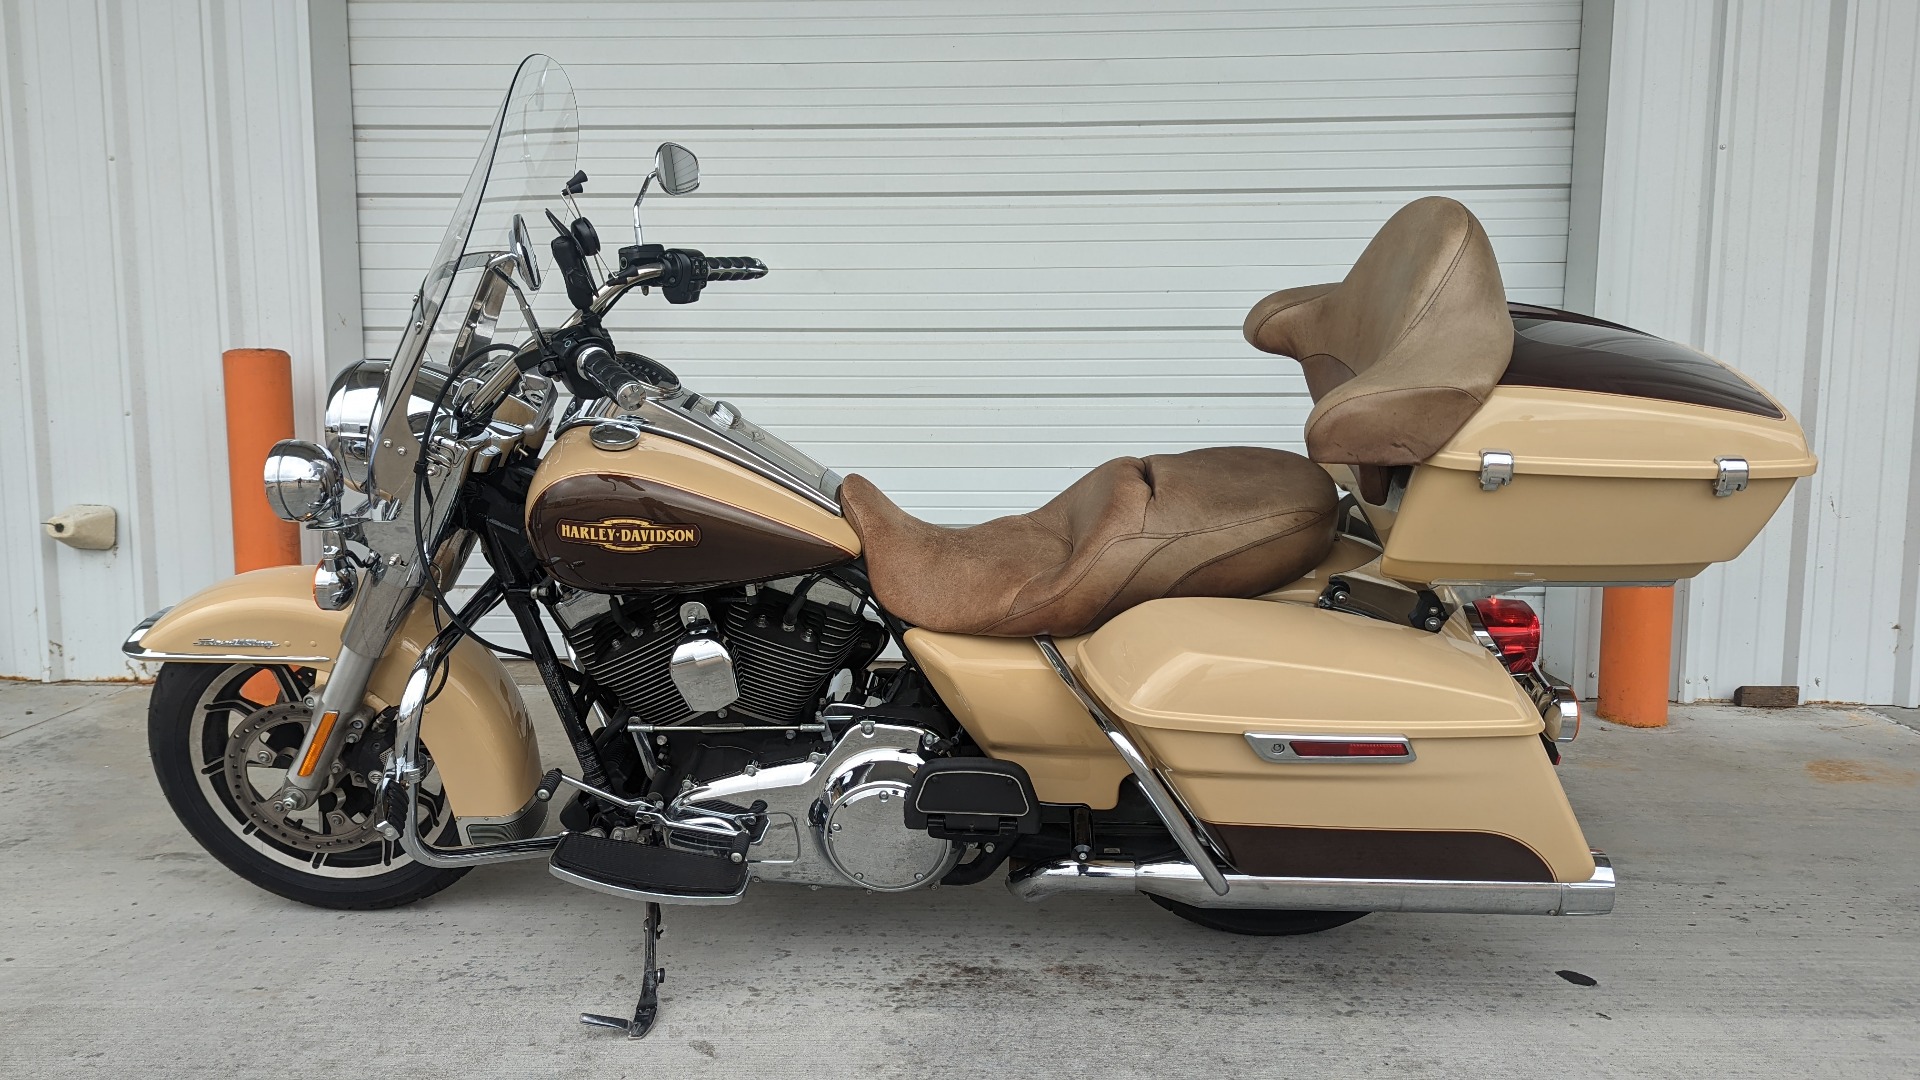 2014 harley road king for sale loaded - Photo 2